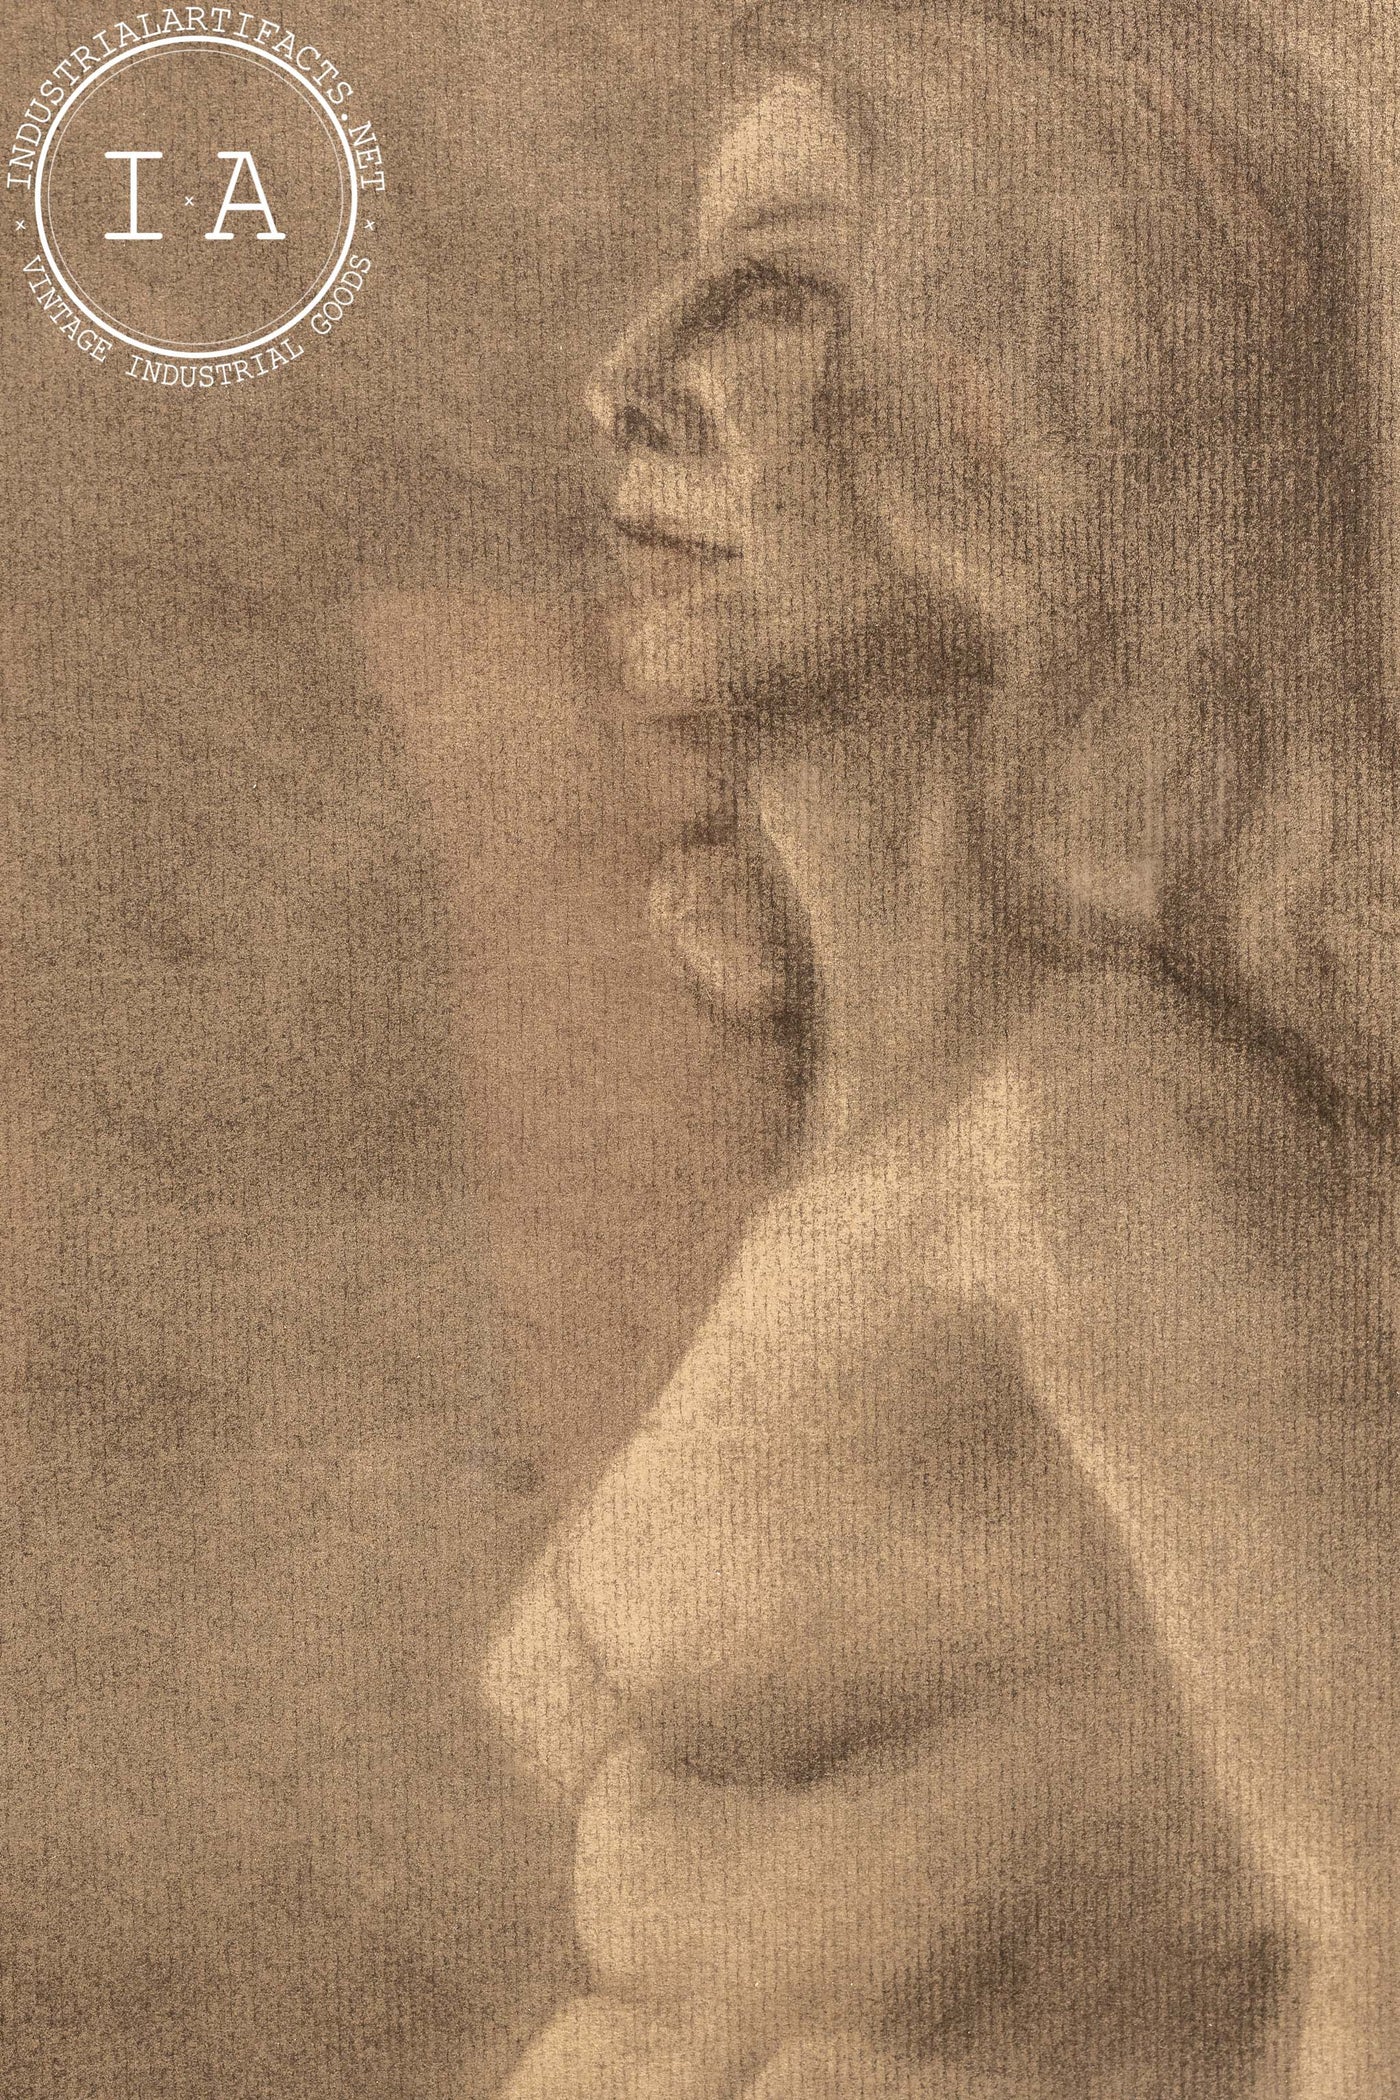 c. 1968 Charcoal Illustration By Raymond Weiler